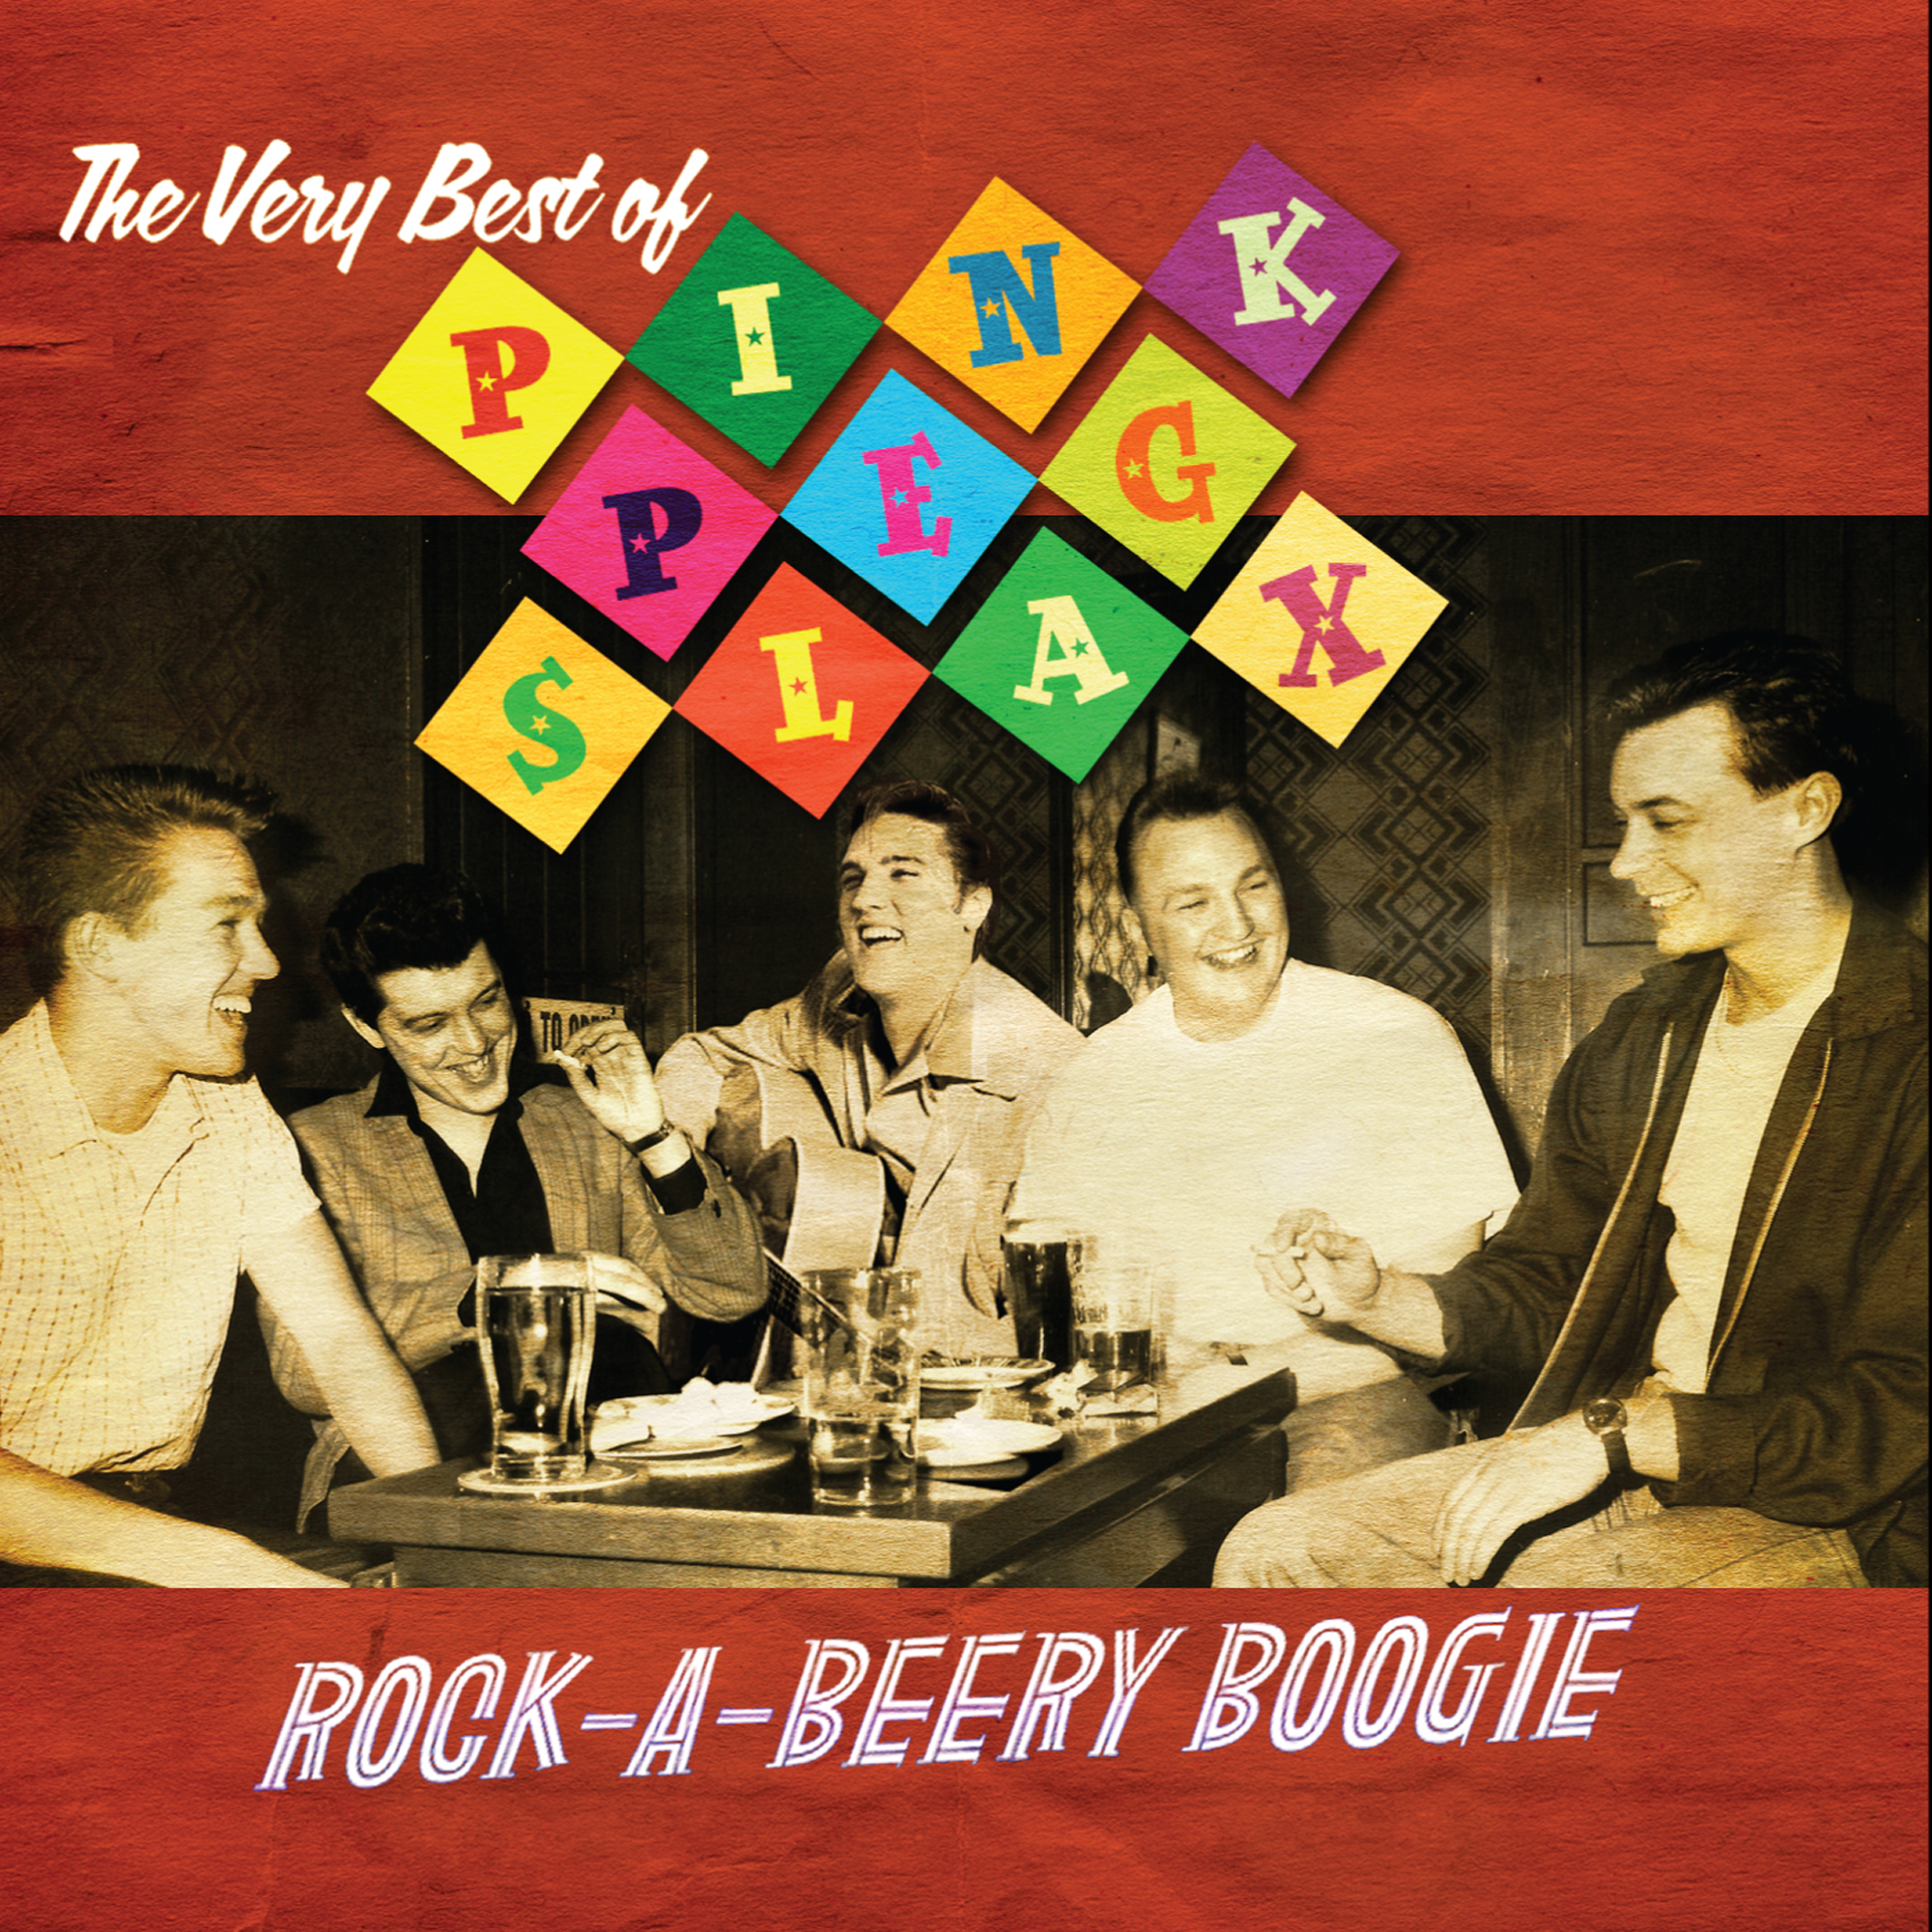 Rock-A-Beery Boogie